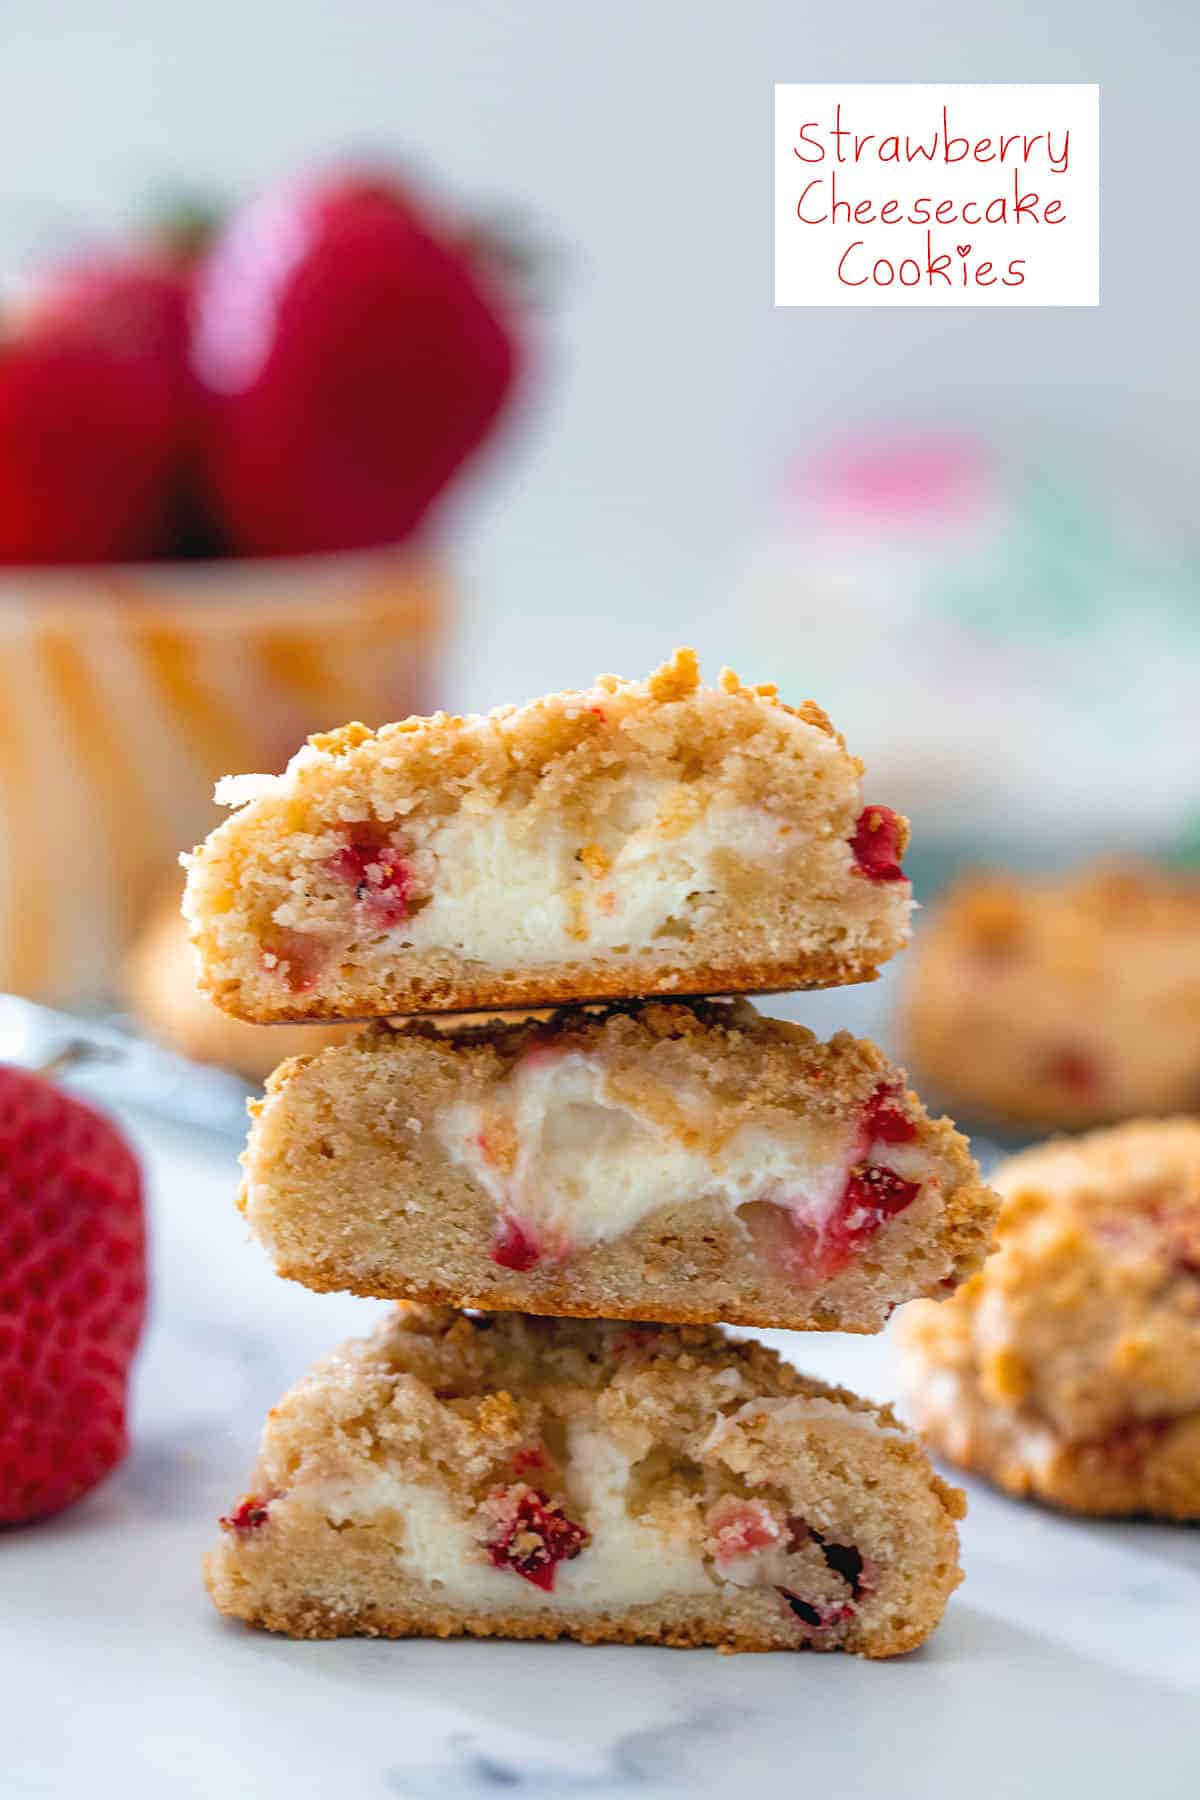 Head-on view of a stack of strawberry cheesecake cookies with cream cheese in the middle with fresh strawberries in the background and recipe title at top.